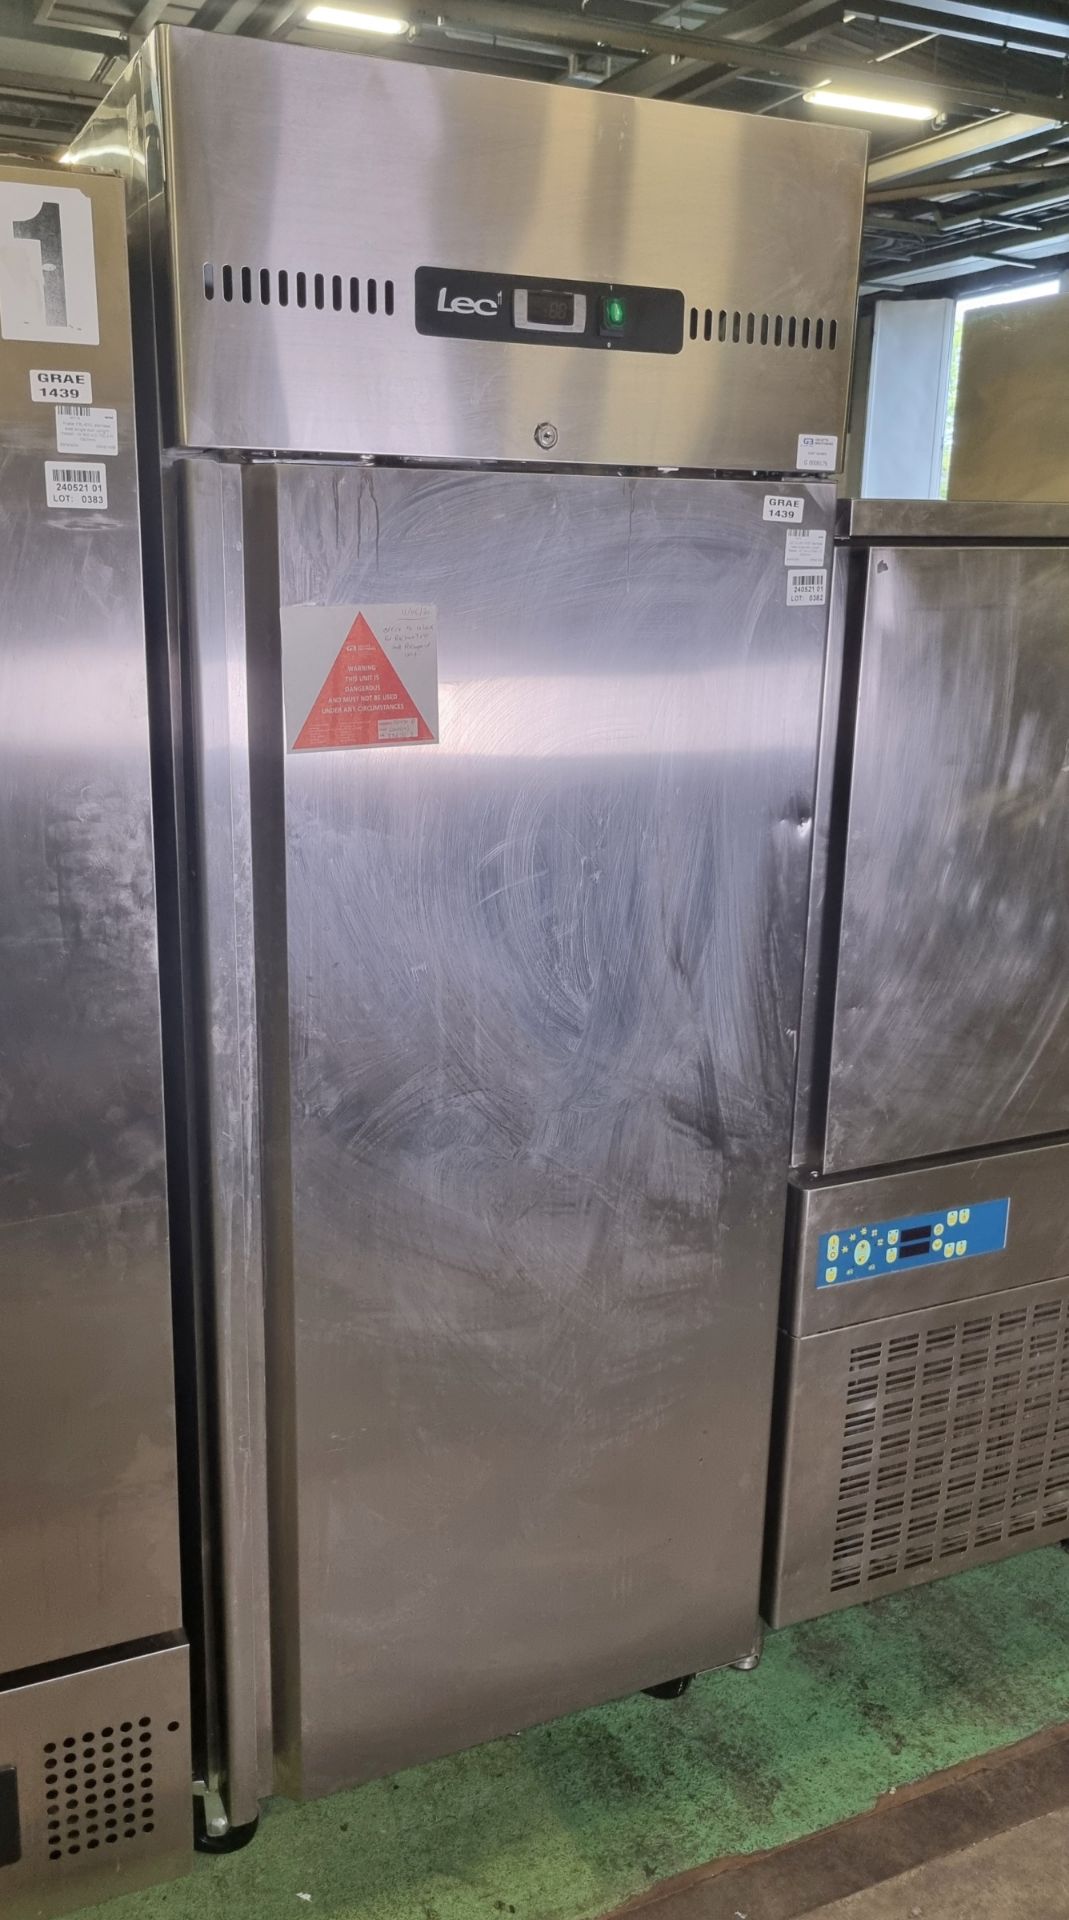 LEC CLGN 700ST stainless steel single door upright freezer - W 740 x D 840 x H 2000mm - Image 2 of 5